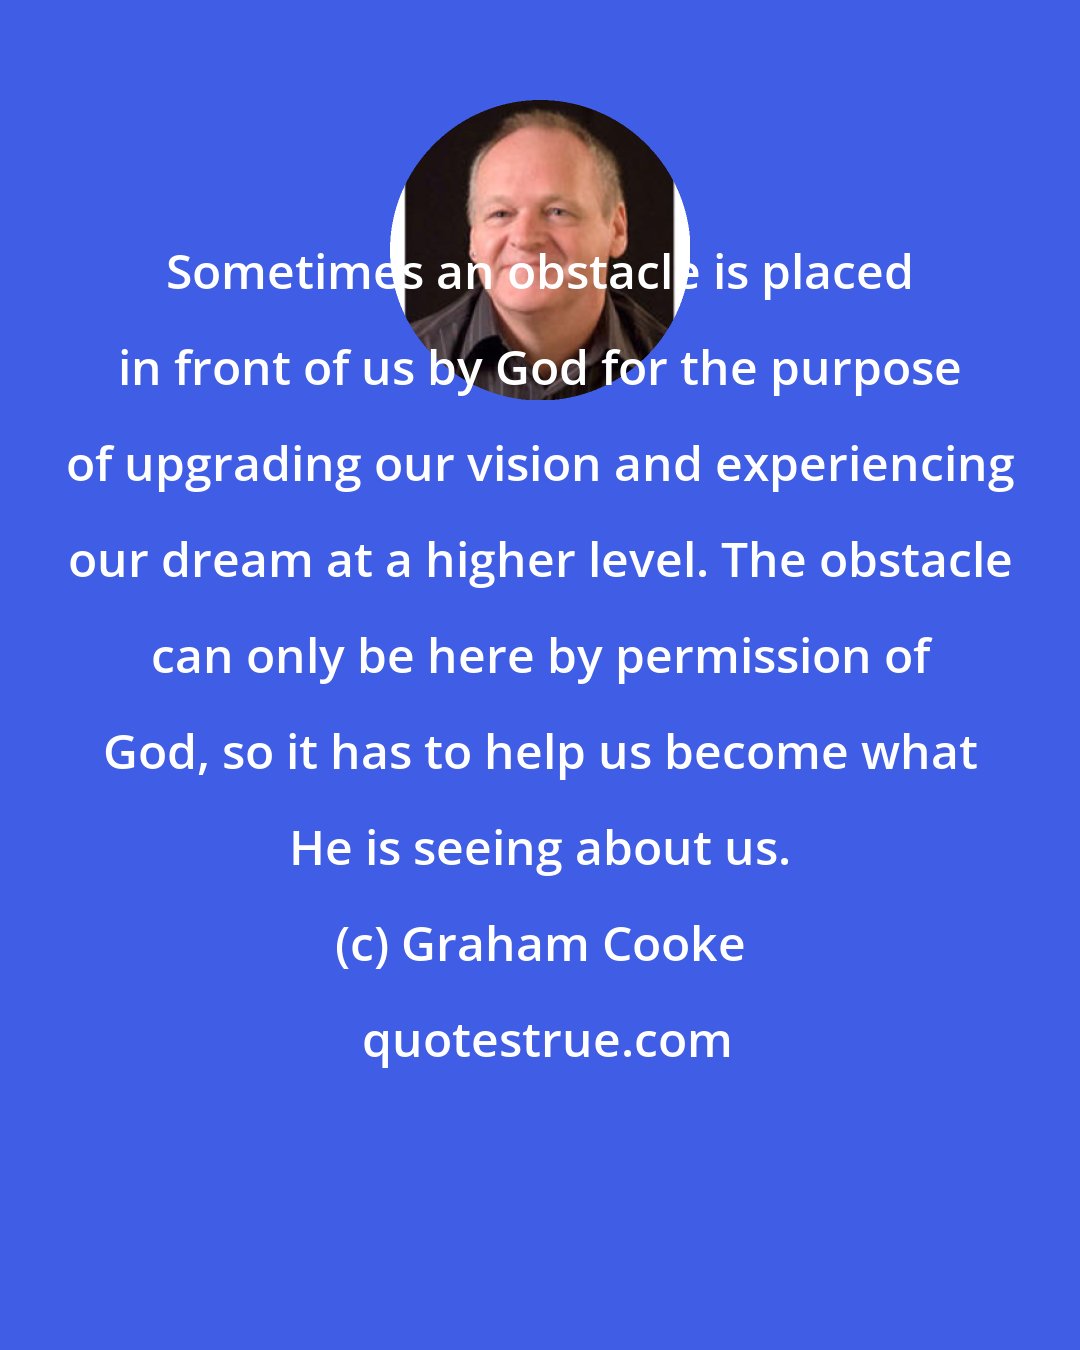 Graham Cooke: Sometimes an obstacle is placed in front of us by God for the purpose of upgrading our vision and experiencing our dream at a higher level. The obstacle can only be here by permission of God, so it has to help us become what He is seeing about us.